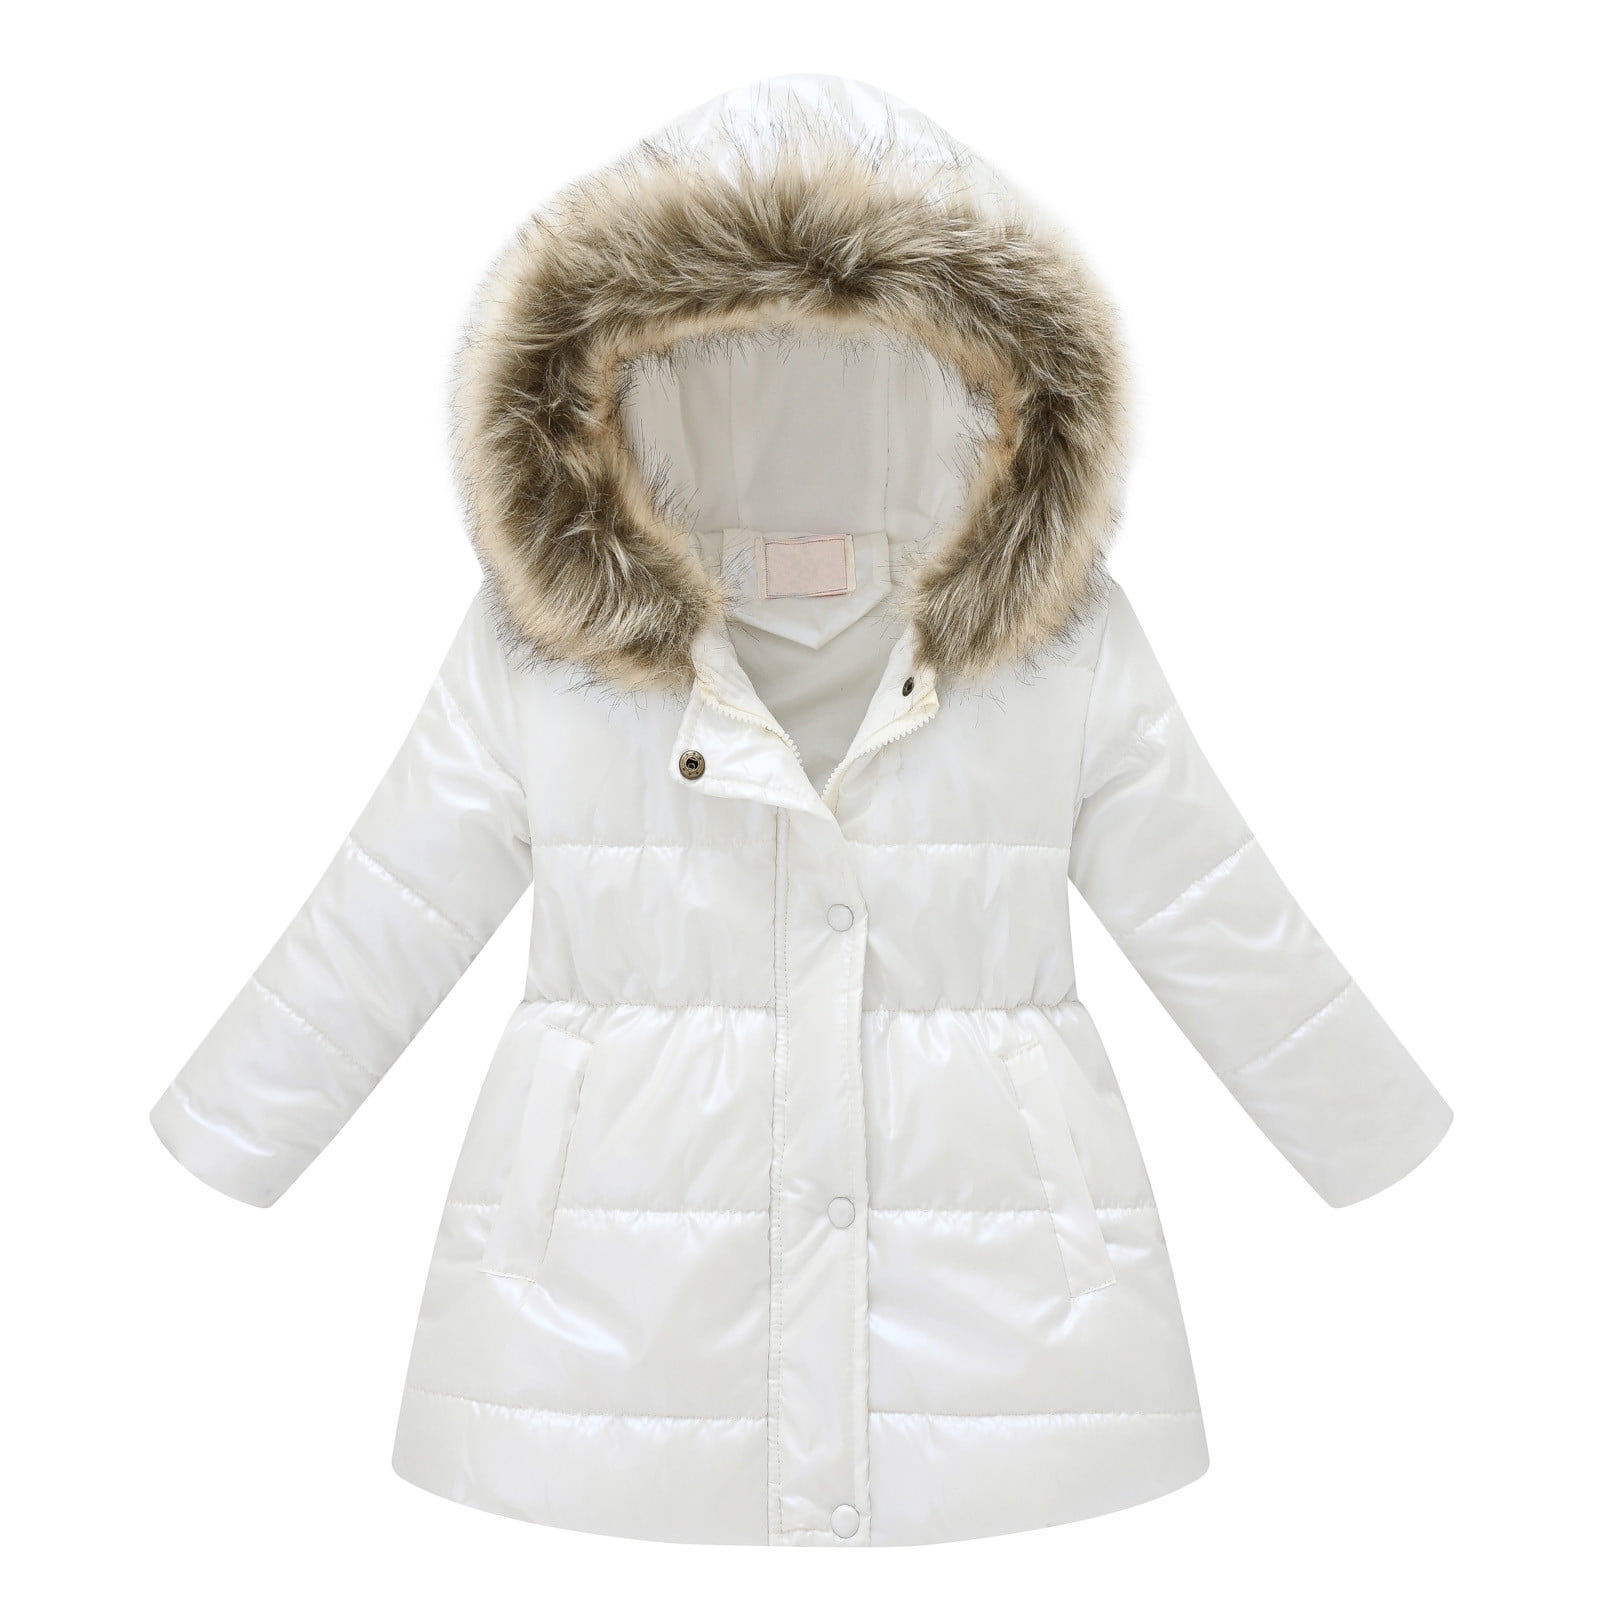 Warm Coats For Girls Baby Toddler Kids Winter Thick Warm Hooded ...